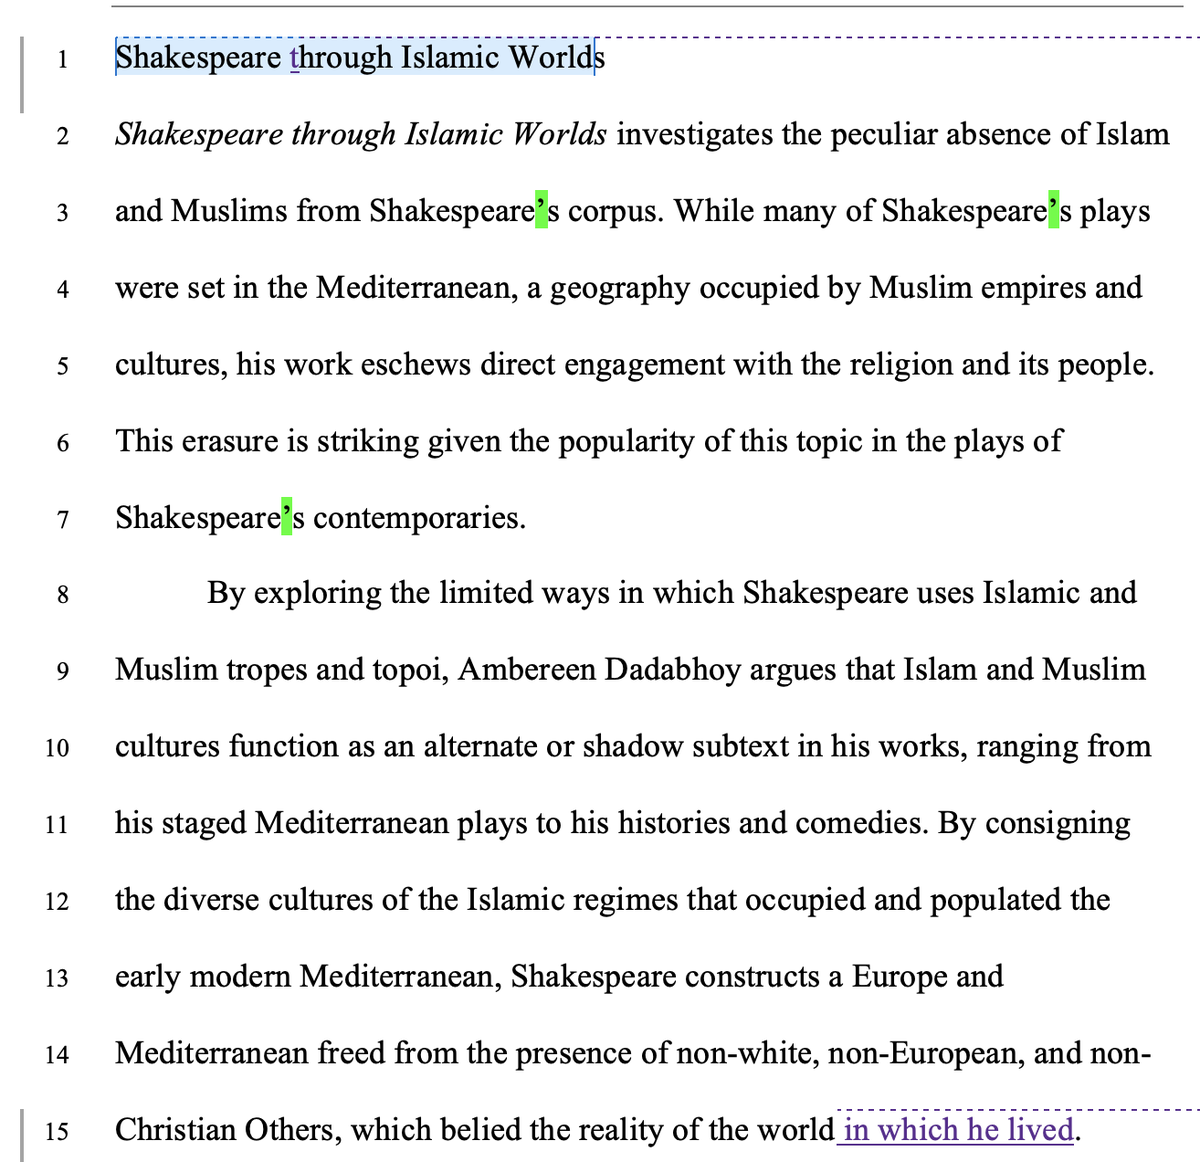 It's becoming more real! Shakespeare through Islamic Worlds copy editing is on. #ShakeRace #IAmEditing